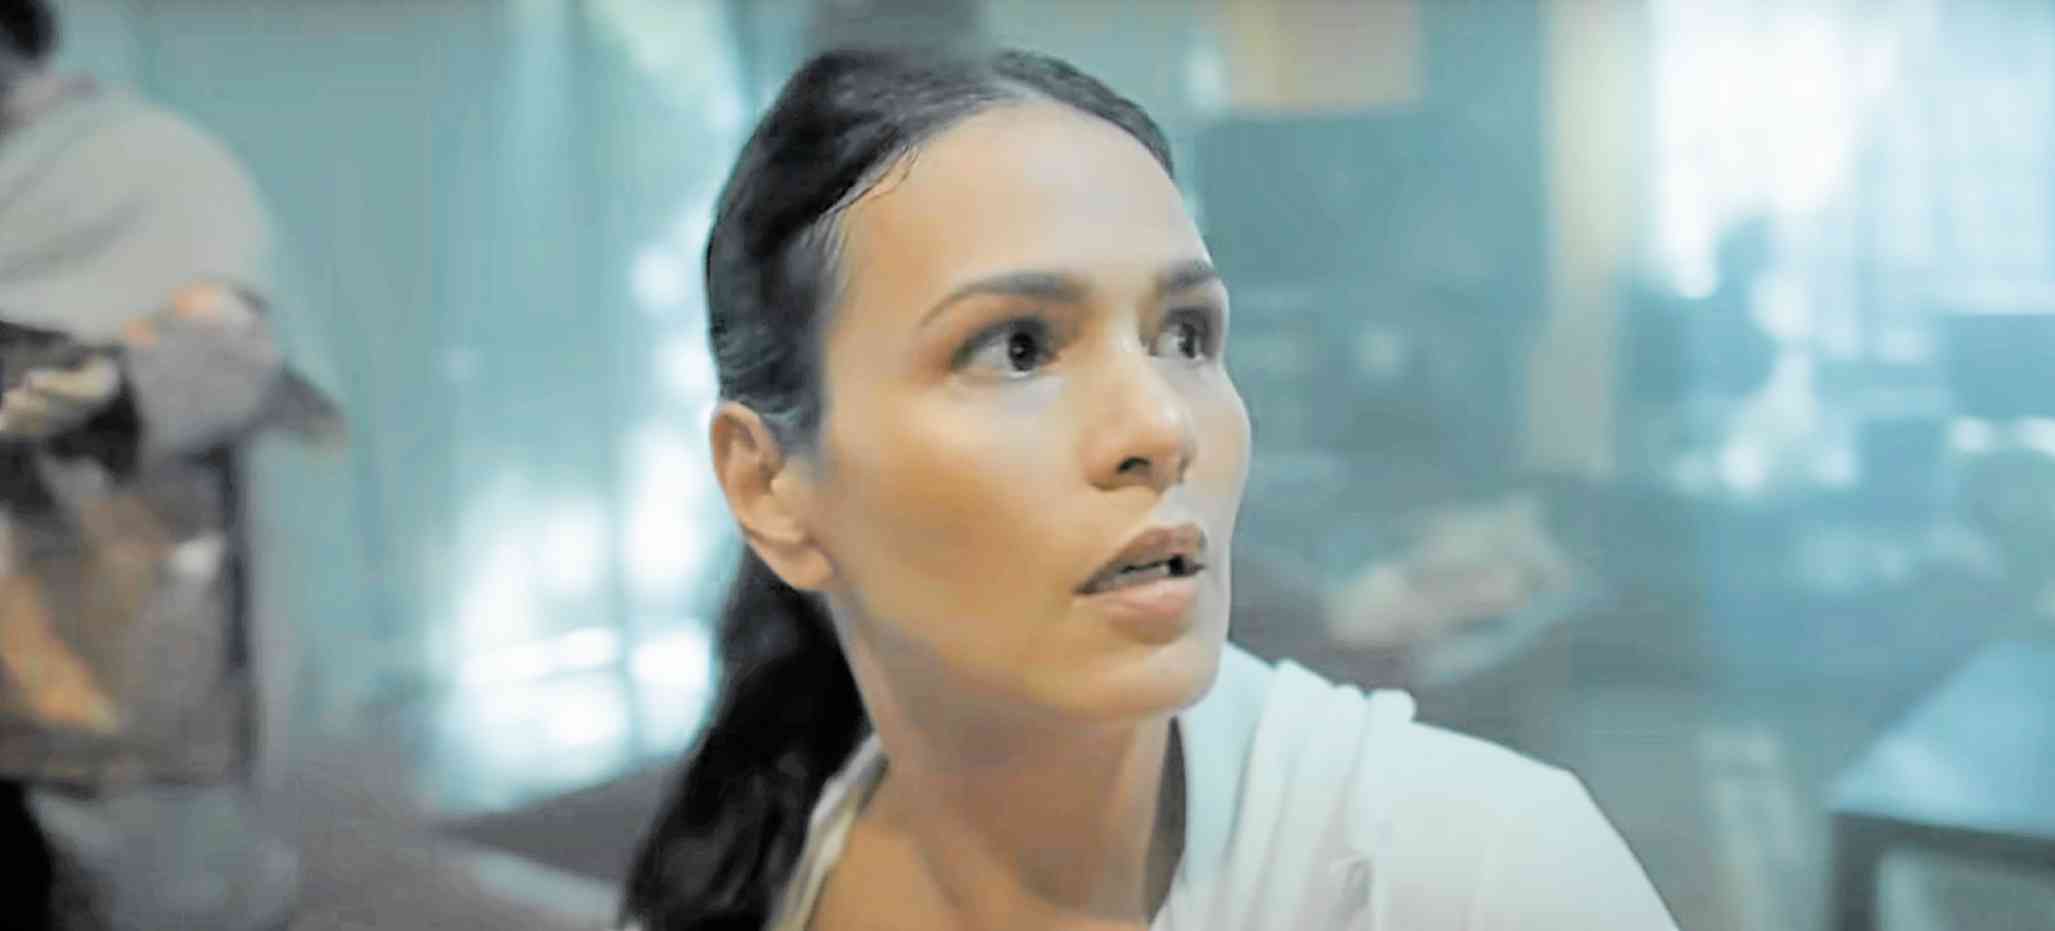 Iza Calzado disappointed over x rating on new film, Actress Iza Calzado is  disappointed over the X rating given to her new film entitled Bliss, #CNNPHNewsNight www.cnn.ph